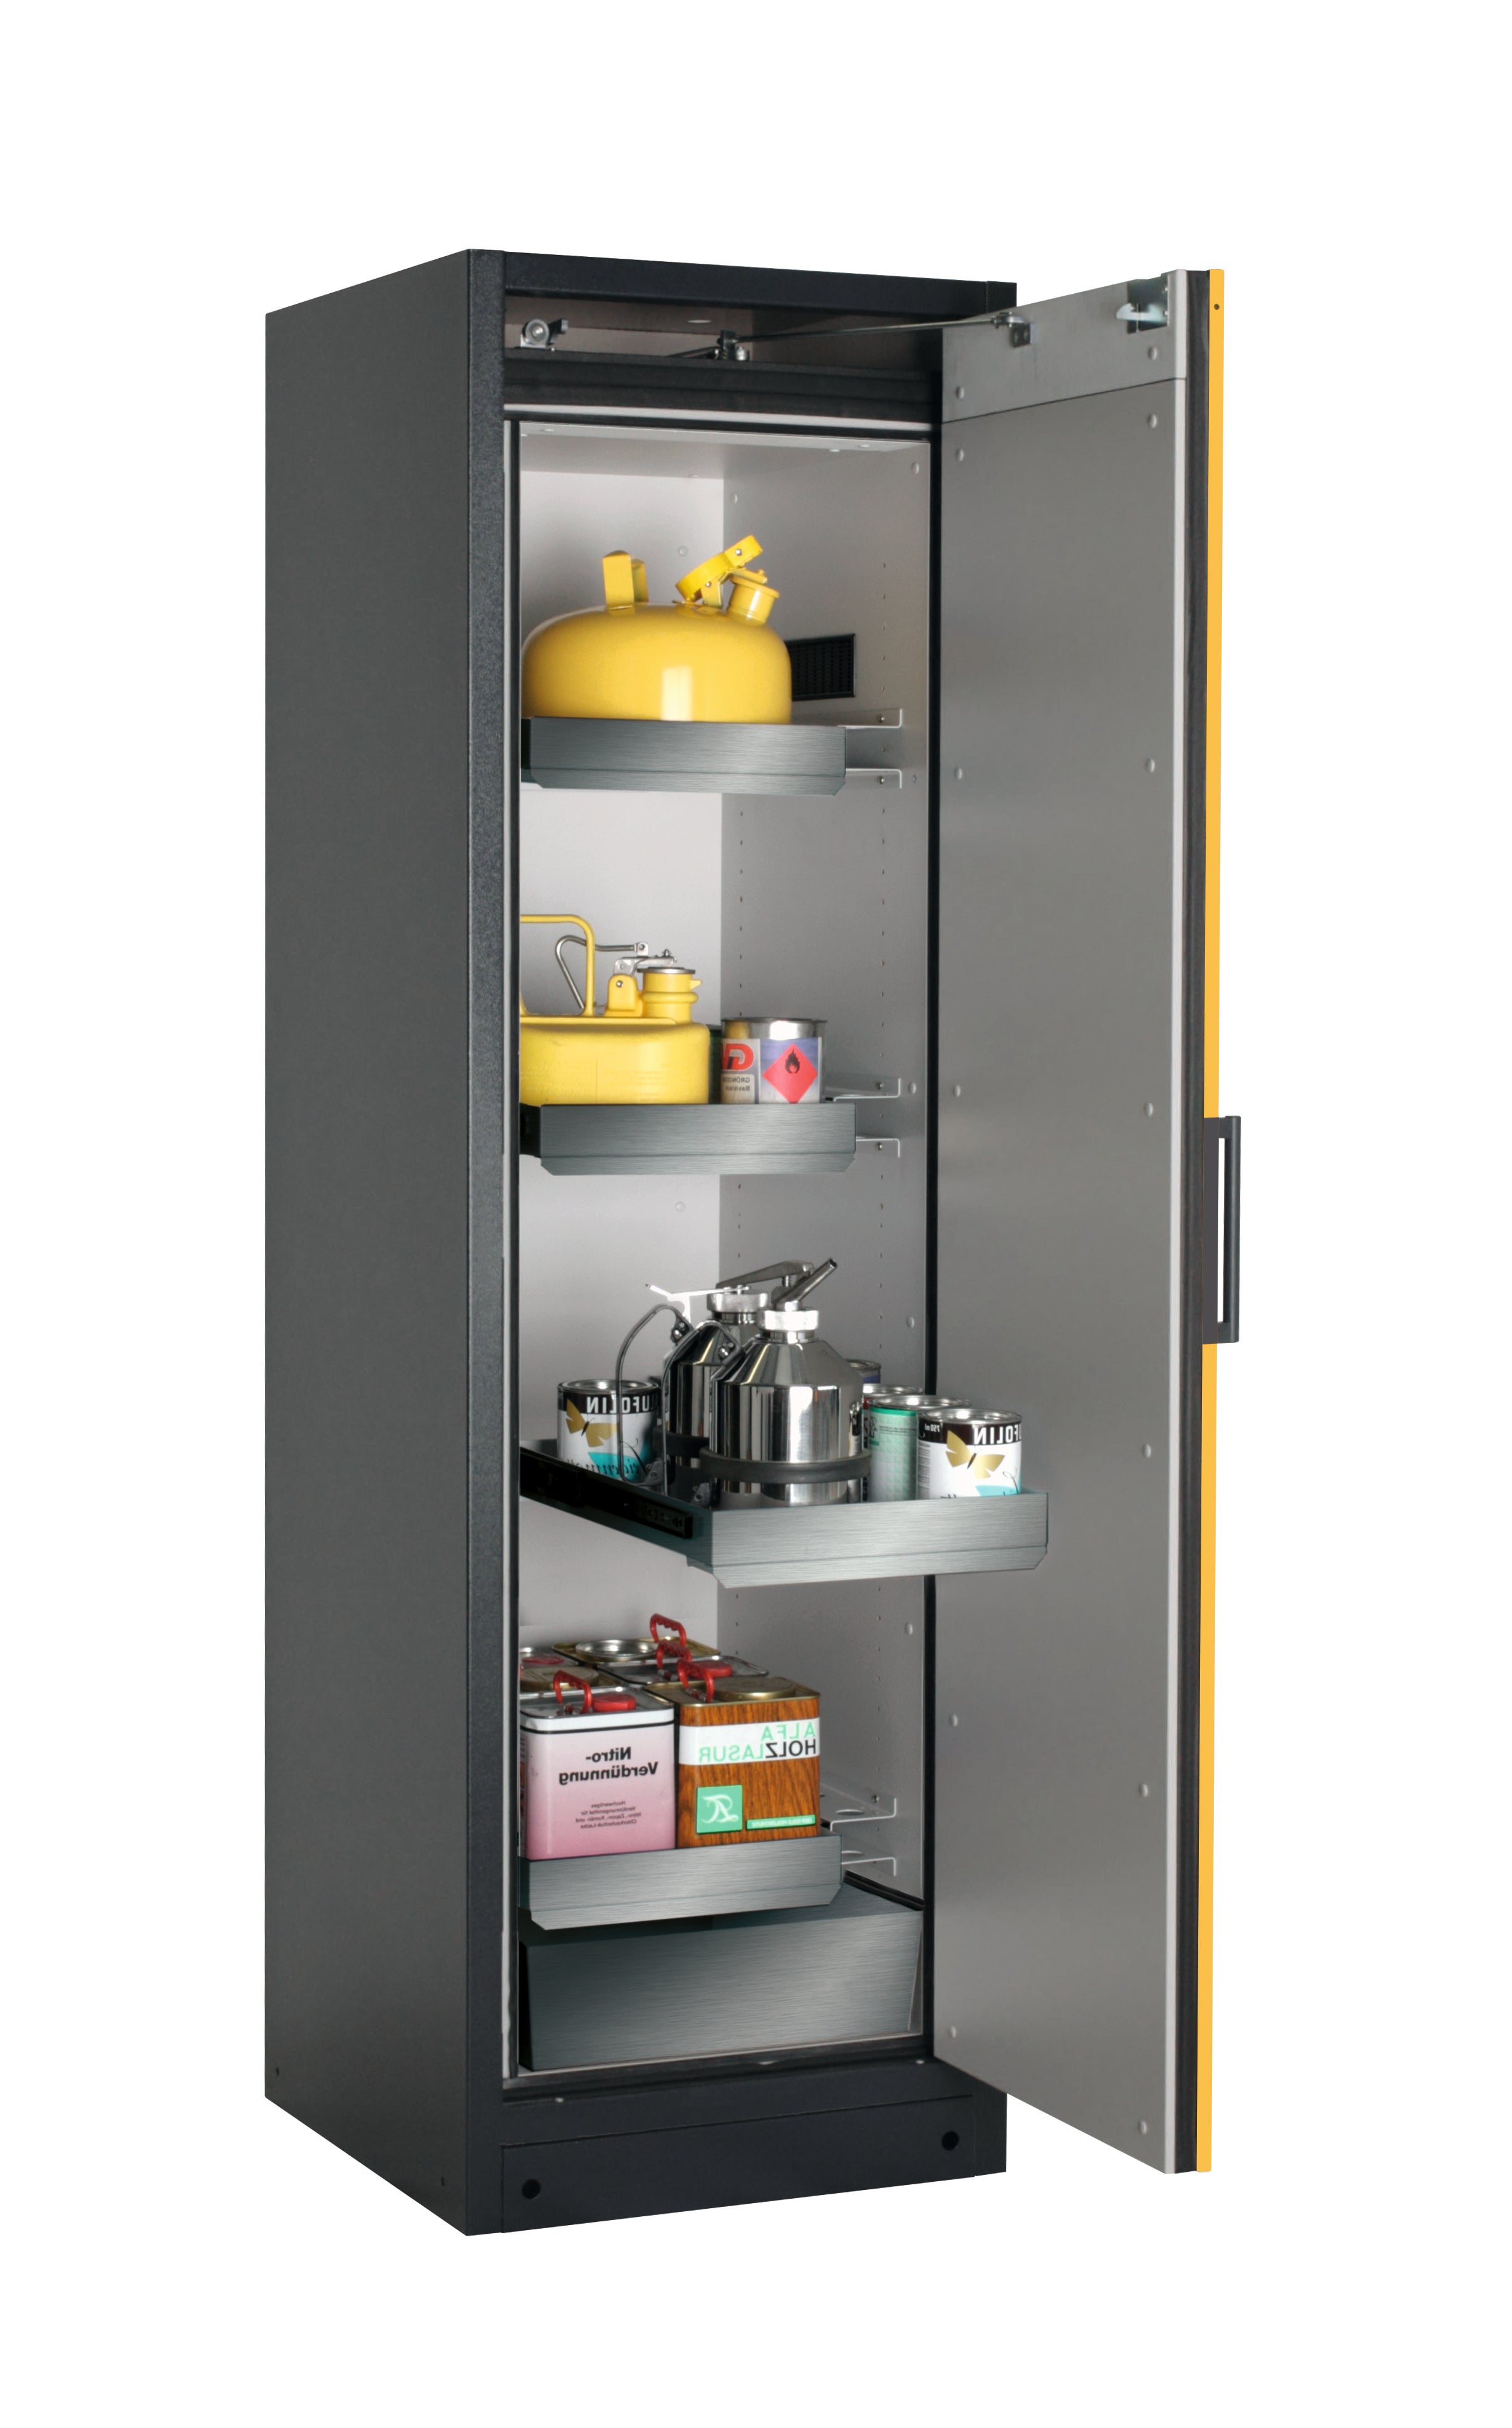 Type 90 safety storage cabinet Q-CLASSIC-90 model Q90.195.060.R in warning yellow RAL 1004 with 3x drawer (standard) (stainless steel 1.4301),